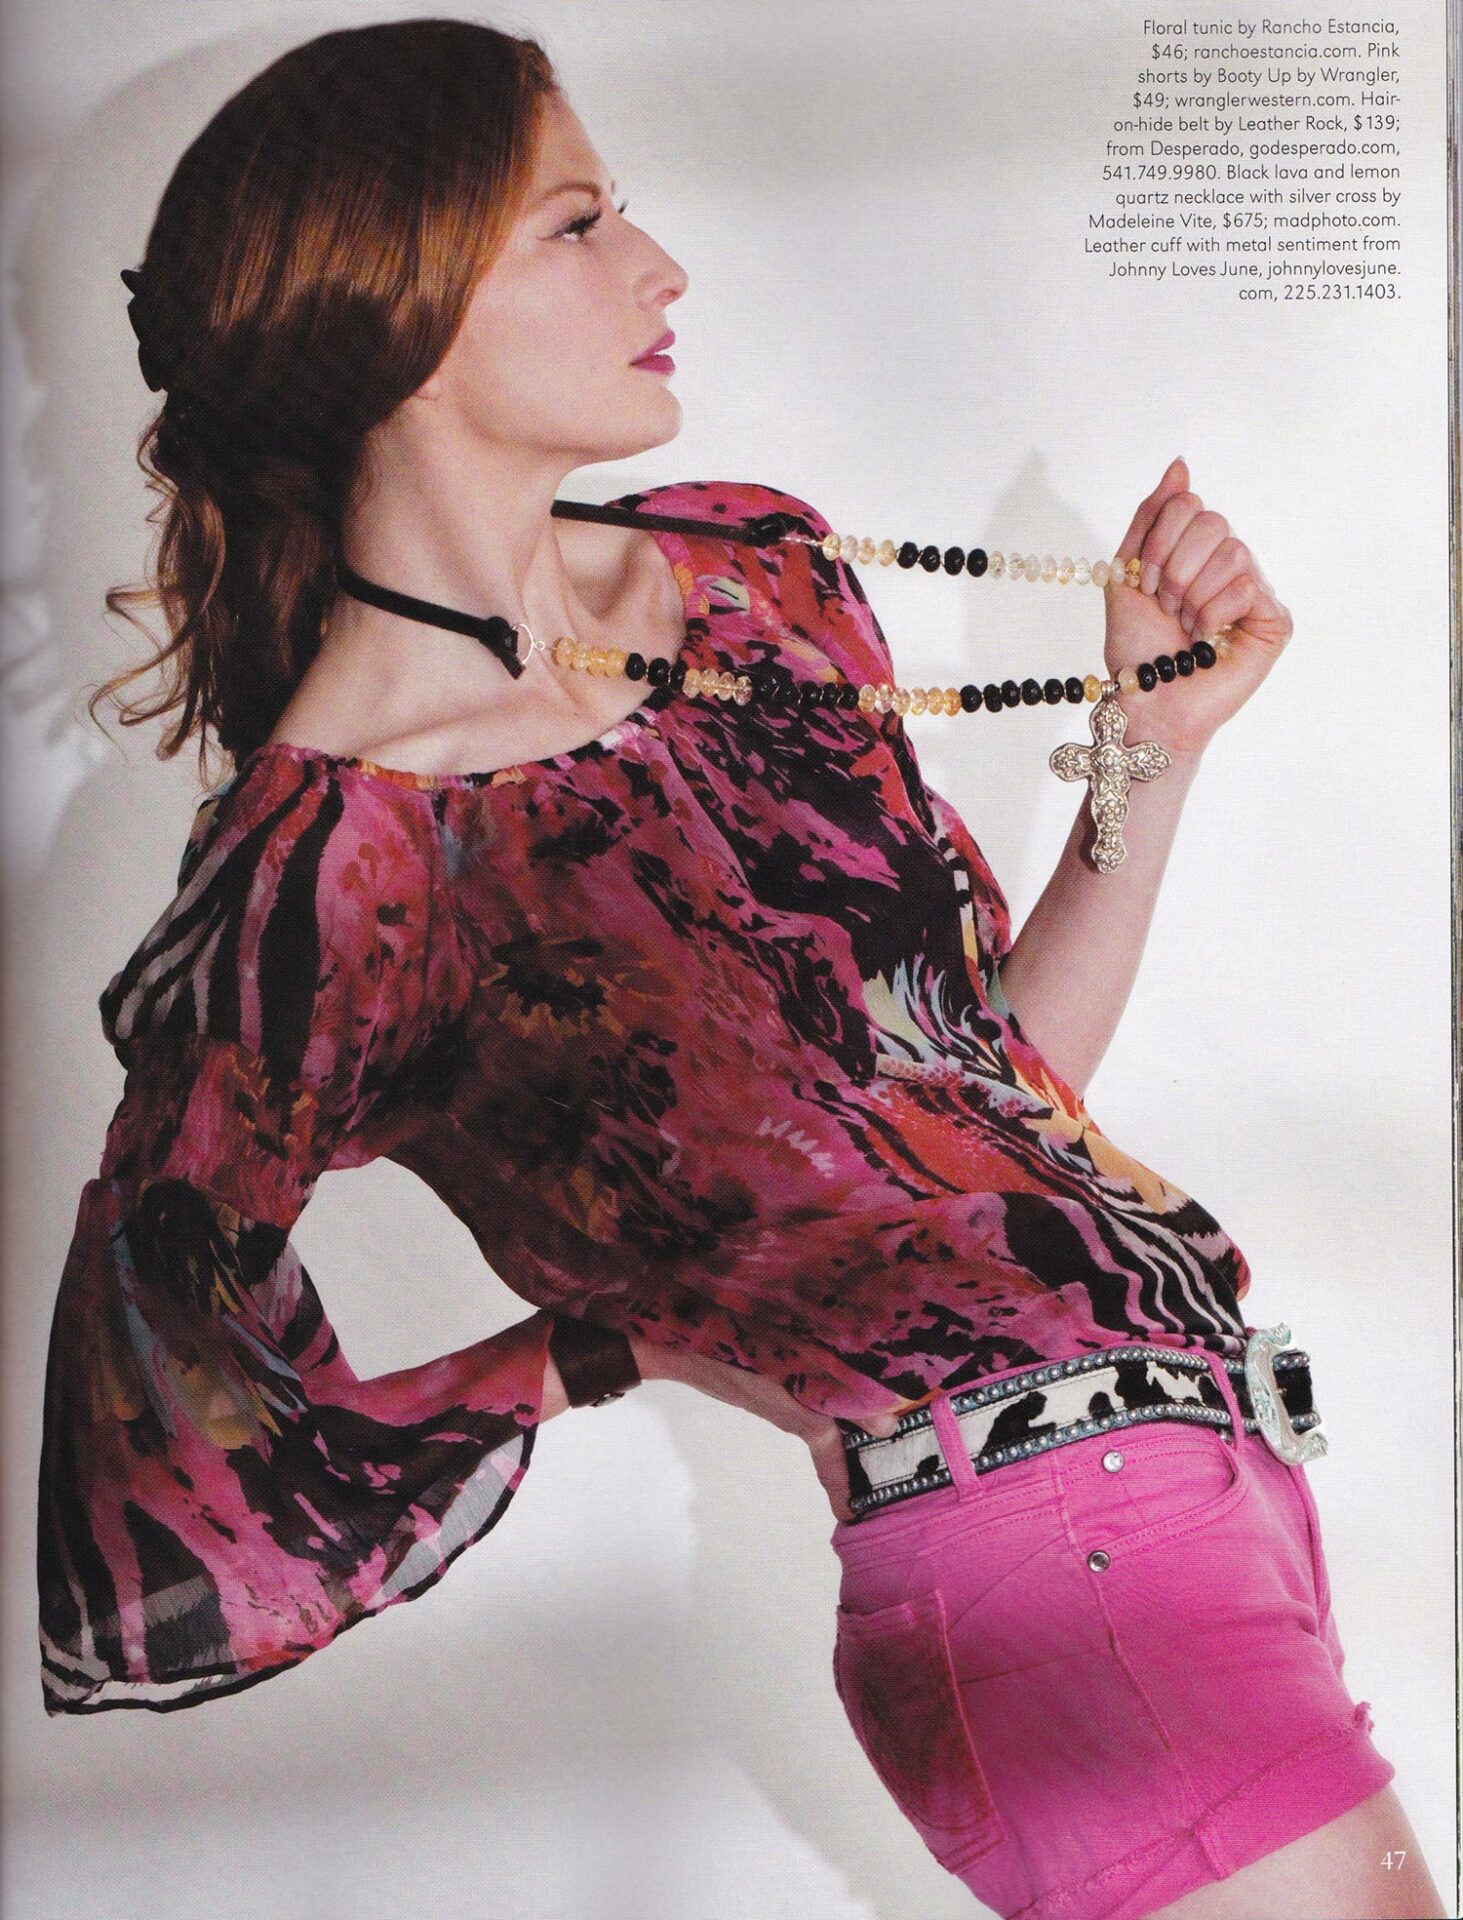 A woman in pink shorts and a necklace is posing in a magazine.